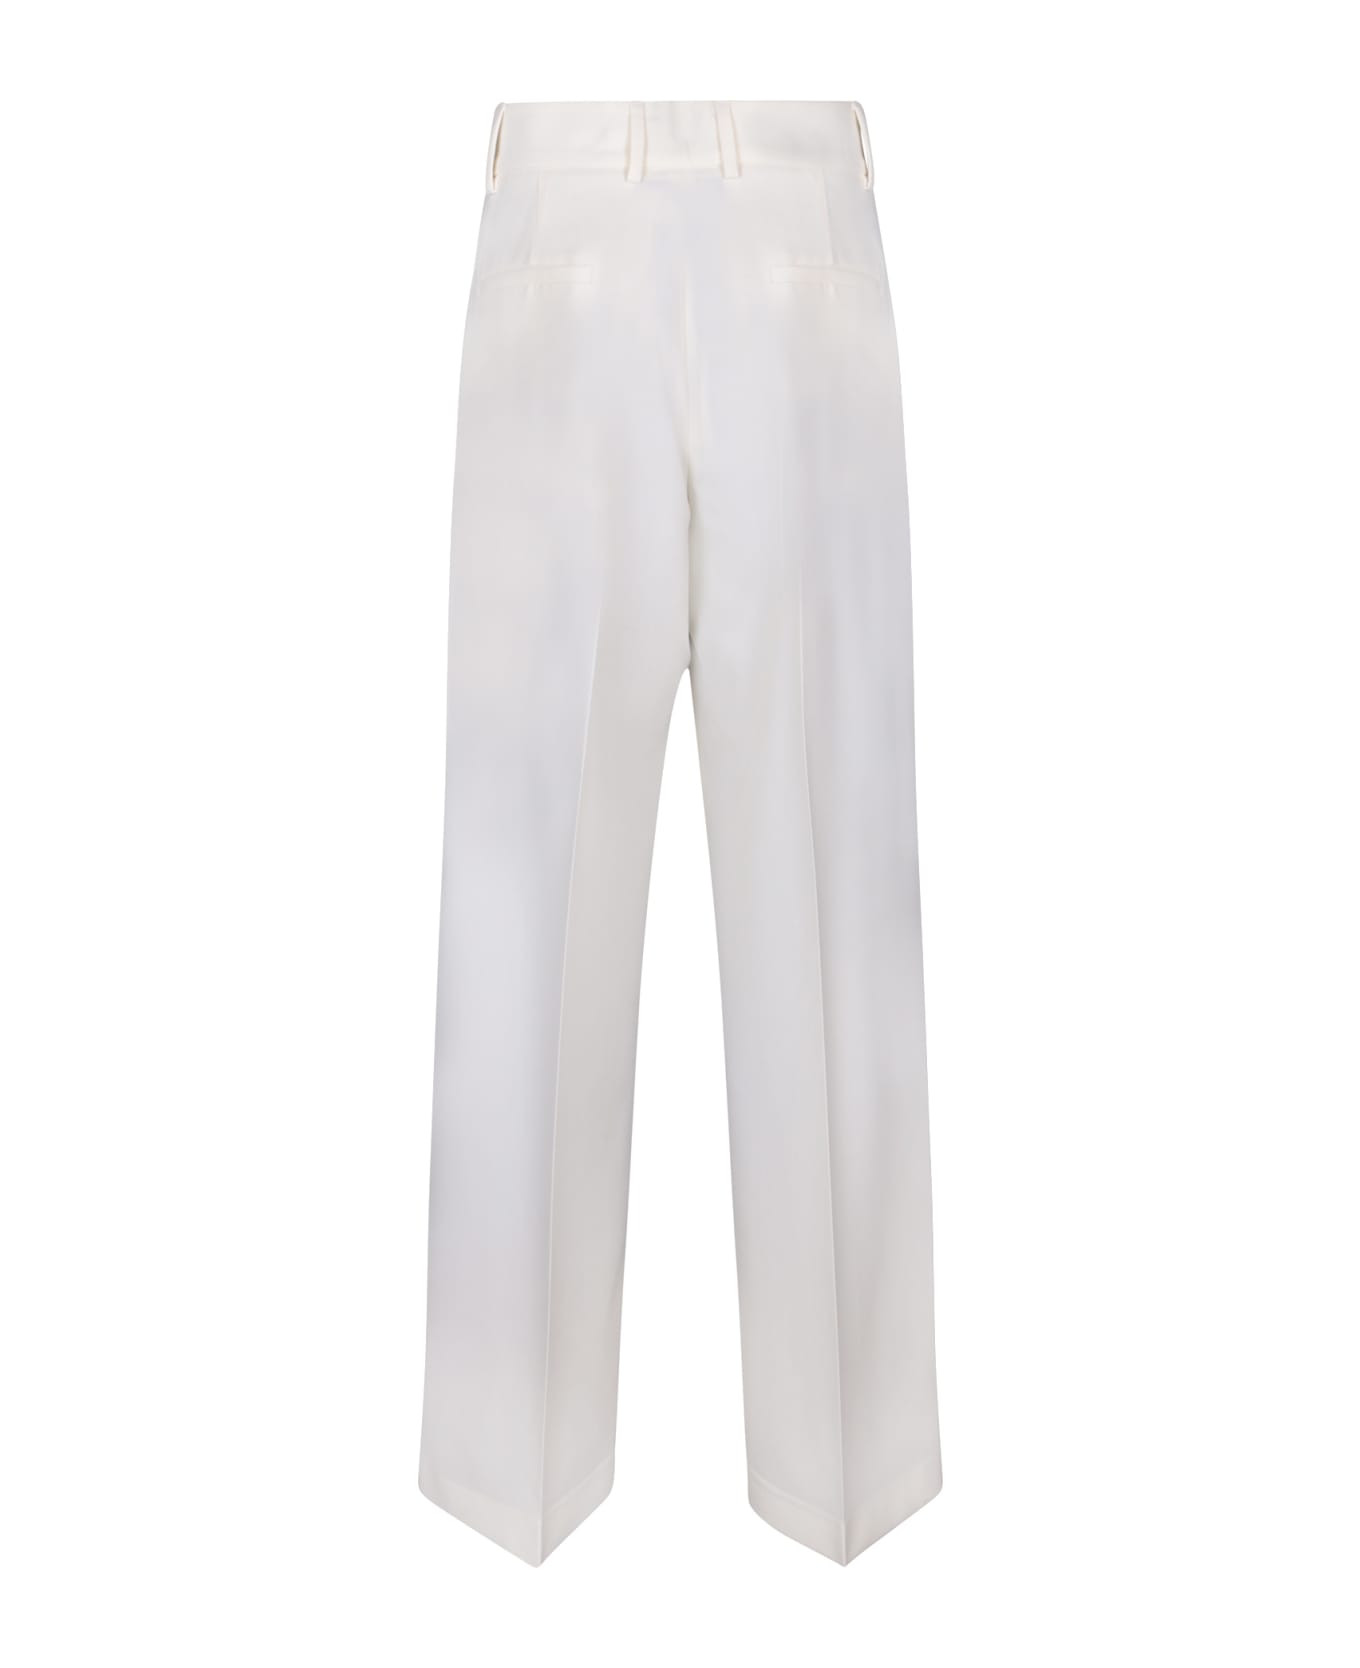 MSGM White Tailored Trousers - White